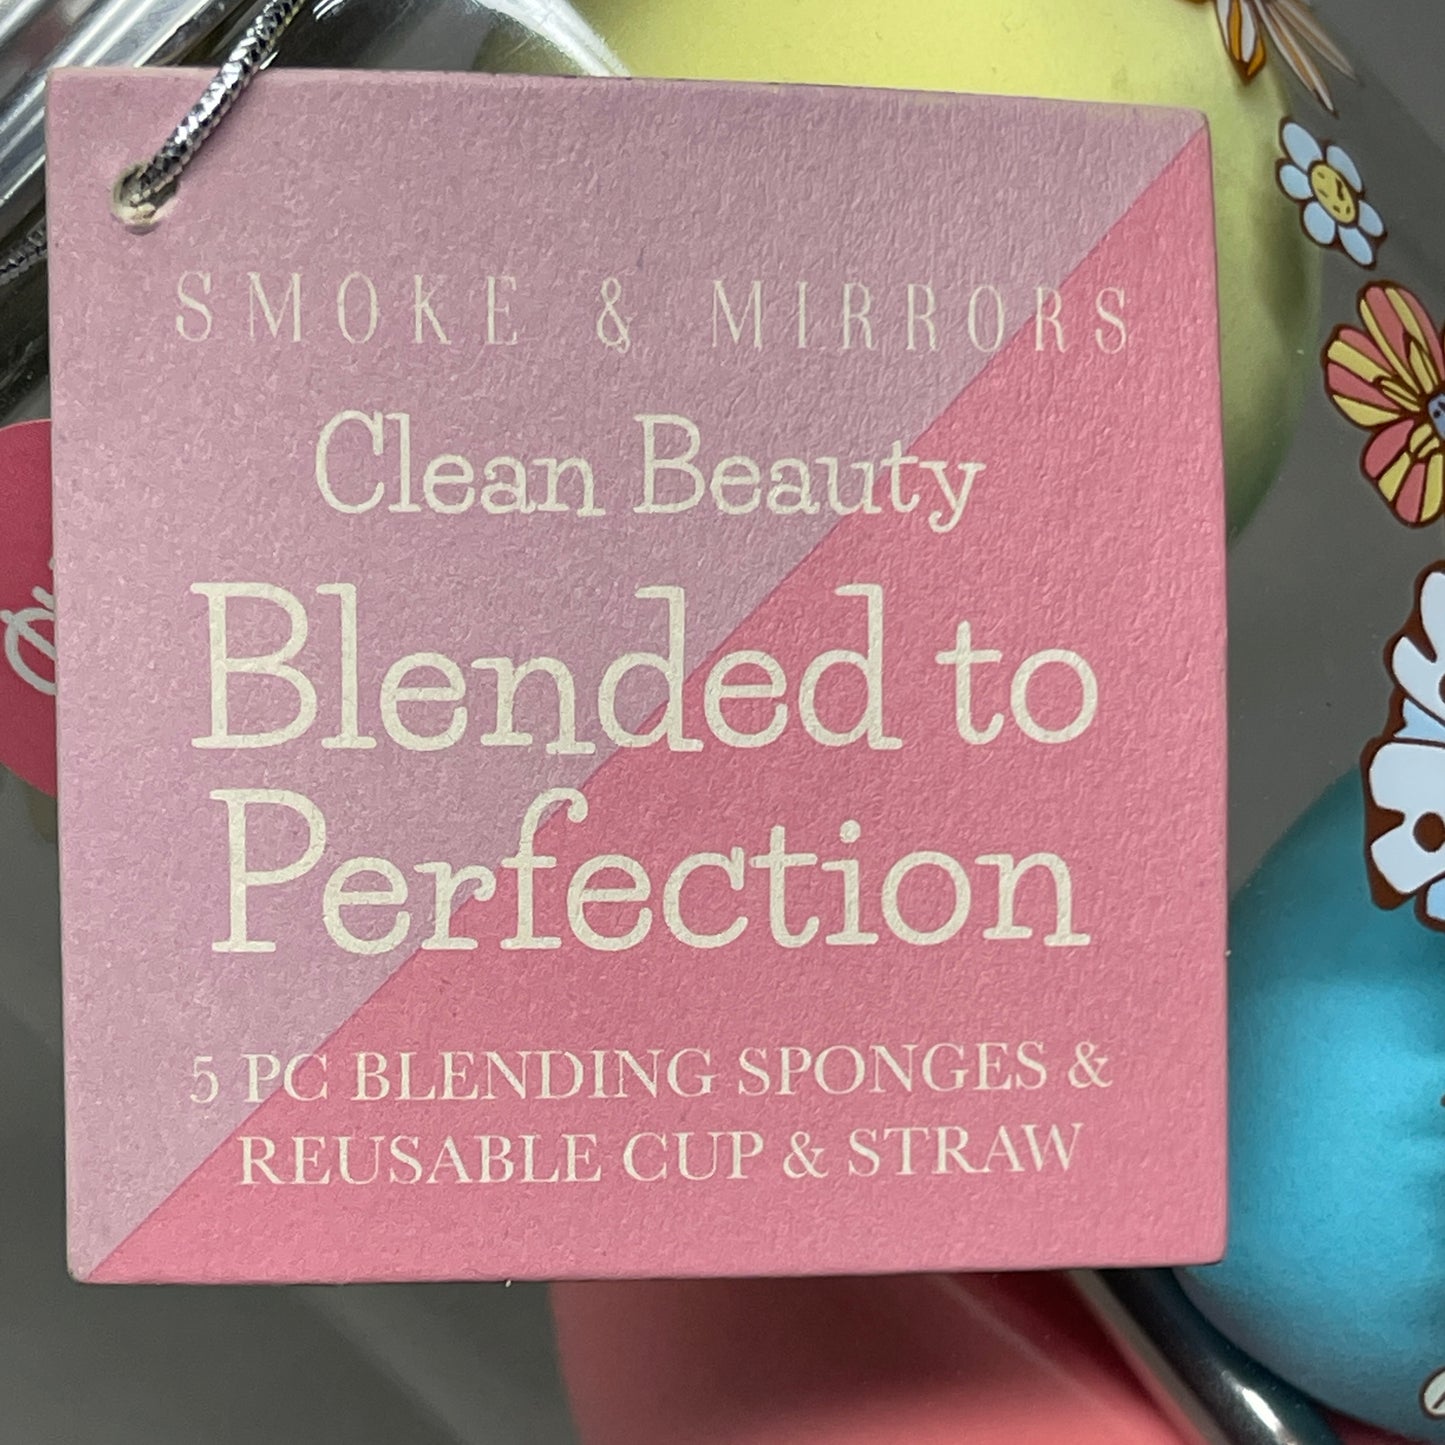 SMOKE & MIRRORS 3-PACK! 5-PIECE Blending Sponges & Reusable Cup & Straw (New)